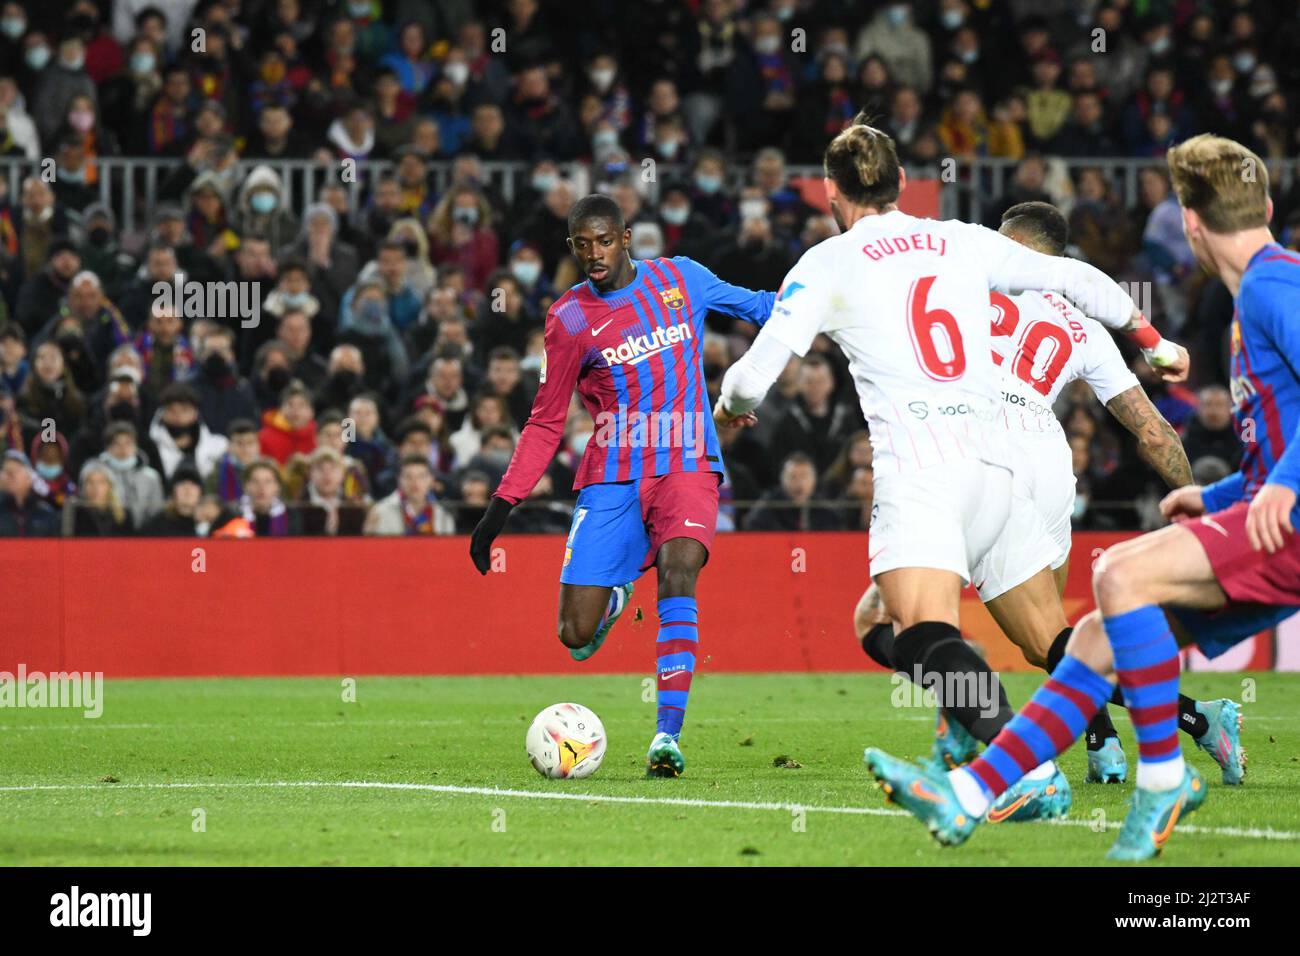 BARCELONA, SPAIN - APRIL 3: Ousmane Dembélé of FC Barcelona passes the ball during La Liga match between FC Barcelona and Sevilla FC at Campo Nou on April 3, 2022 in Barcelona, Spain. (Photo by Sara Aribó/Pximages) Credit: Px Images/Alamy Live News Stock Photo